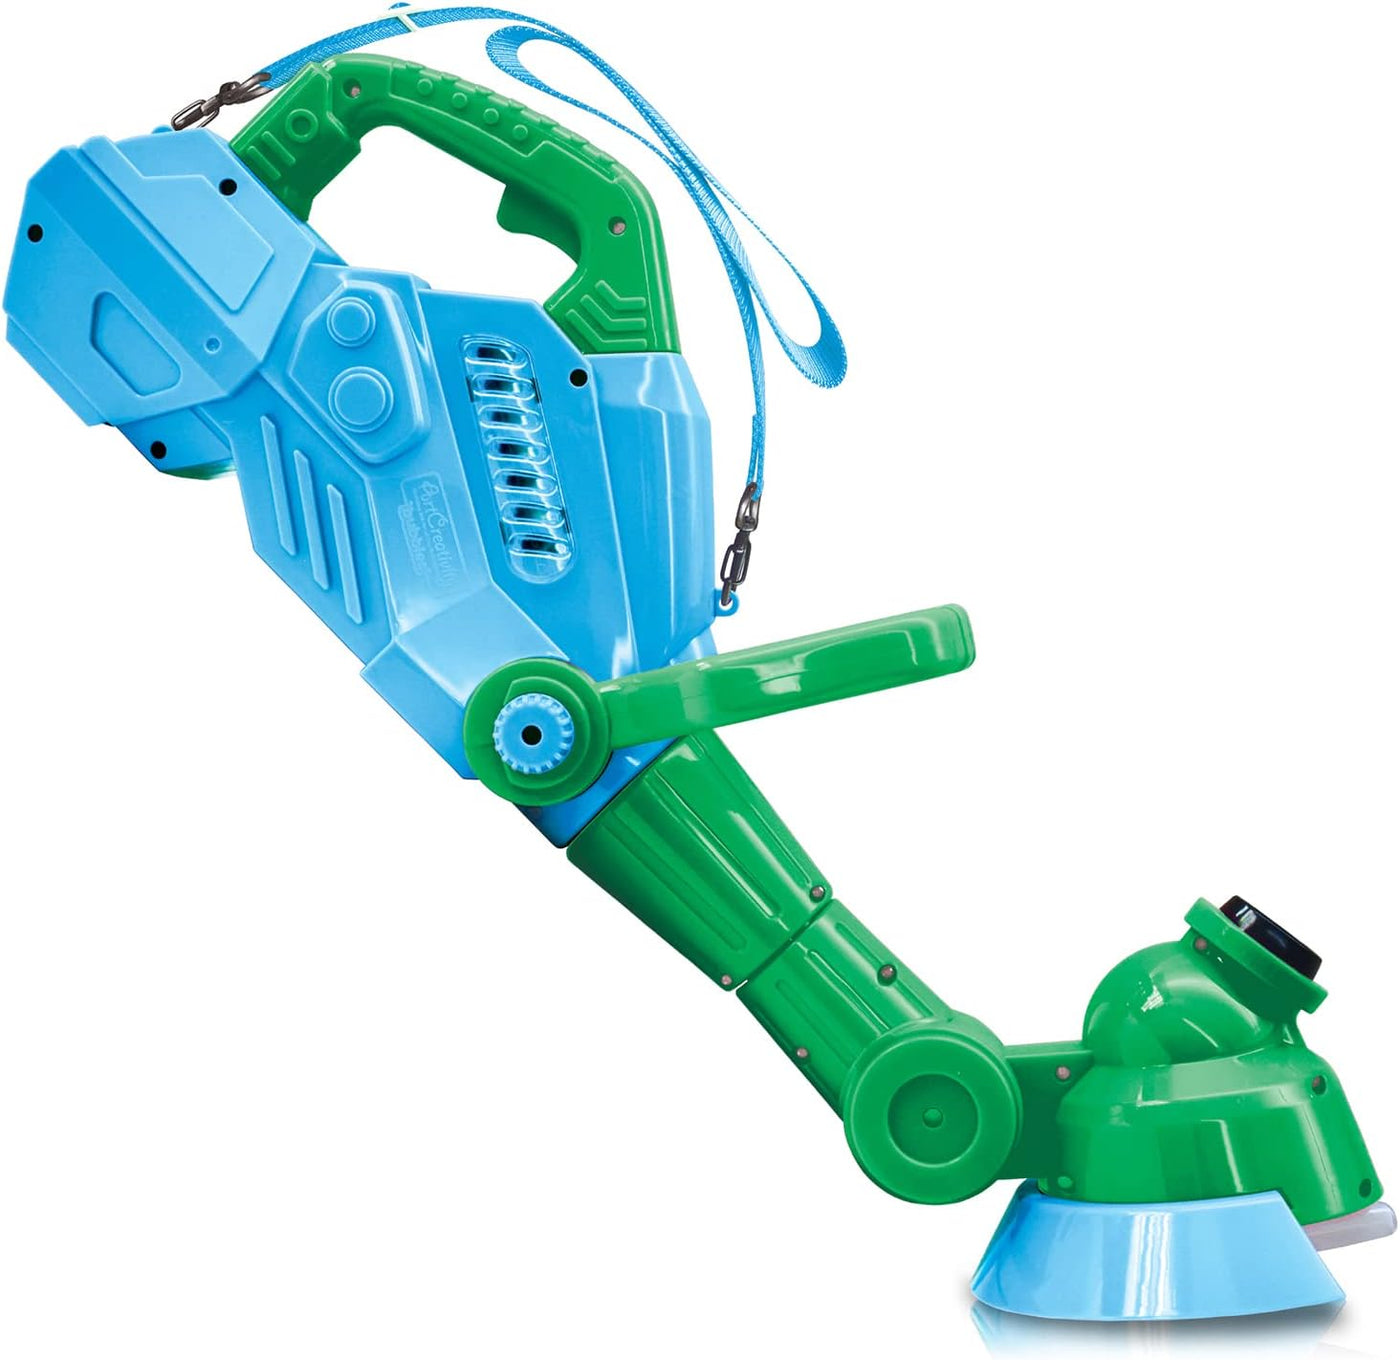 ArtCreativity Bubble String Trimmer, Kids Bubble Blower Machine with Bubble Solution Included, Grass Trimmer Toy with Lights & Sounds, Fun Summer Outdoor Toys for Toddlers, Blue&Green